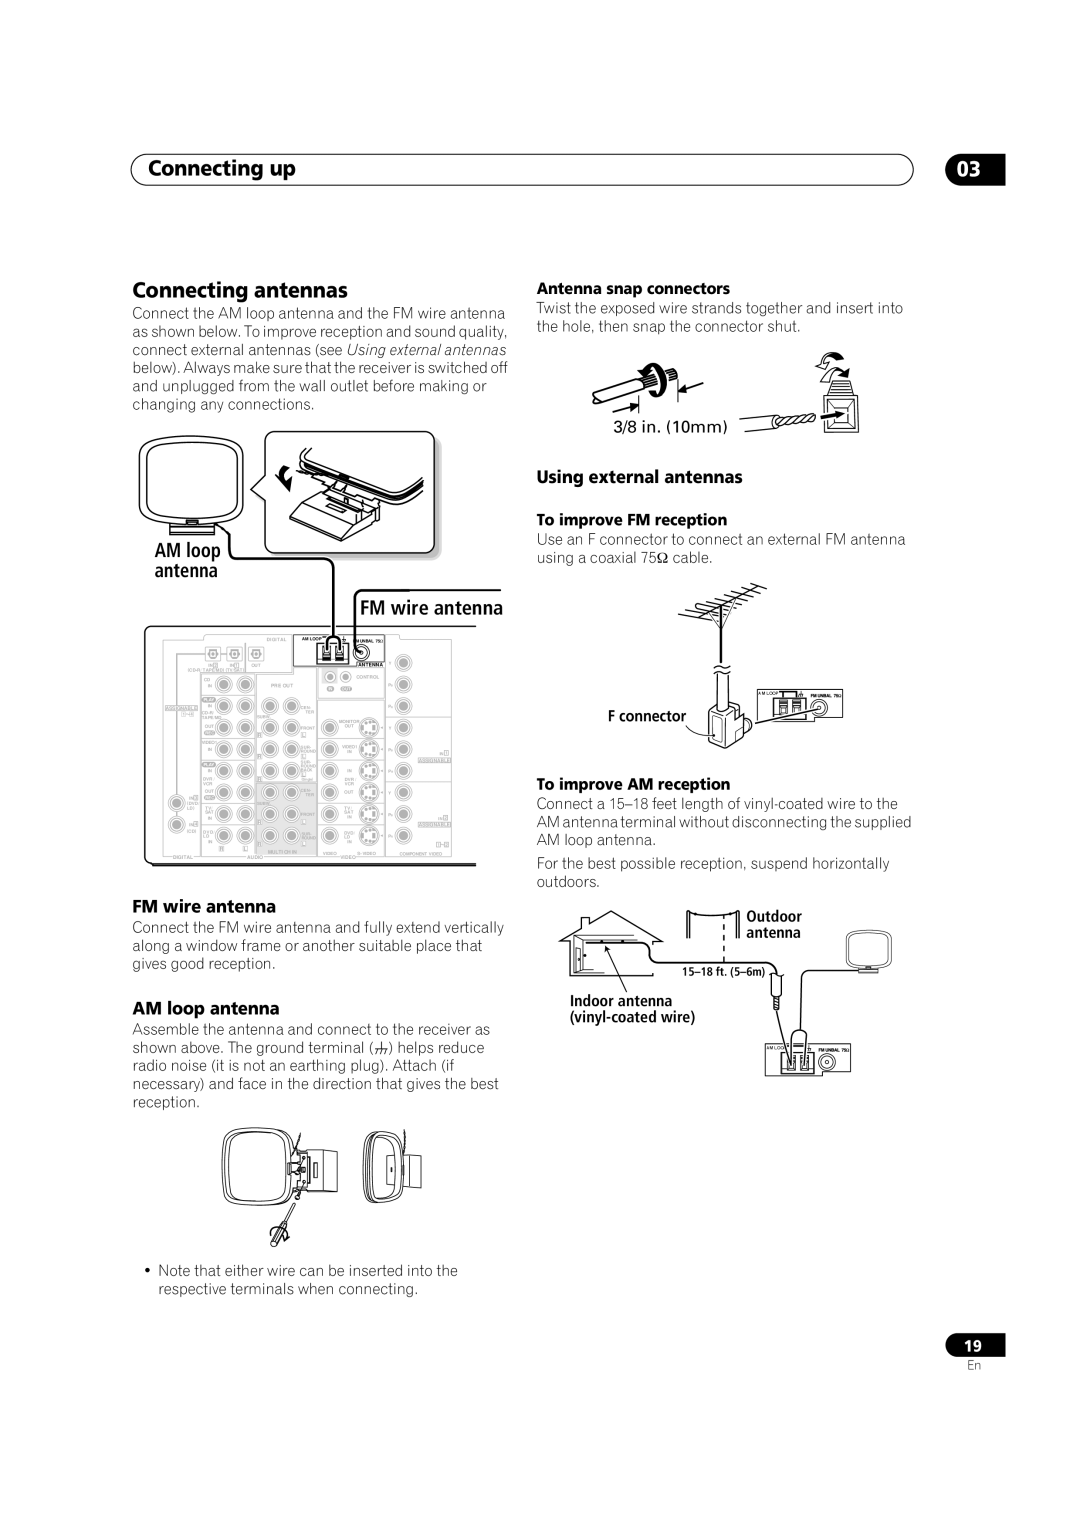 Pioneer VSX-1014TX manual Connecting up Connecting antennas, FM wire antenna, AM loop antenna, Using external antennas 